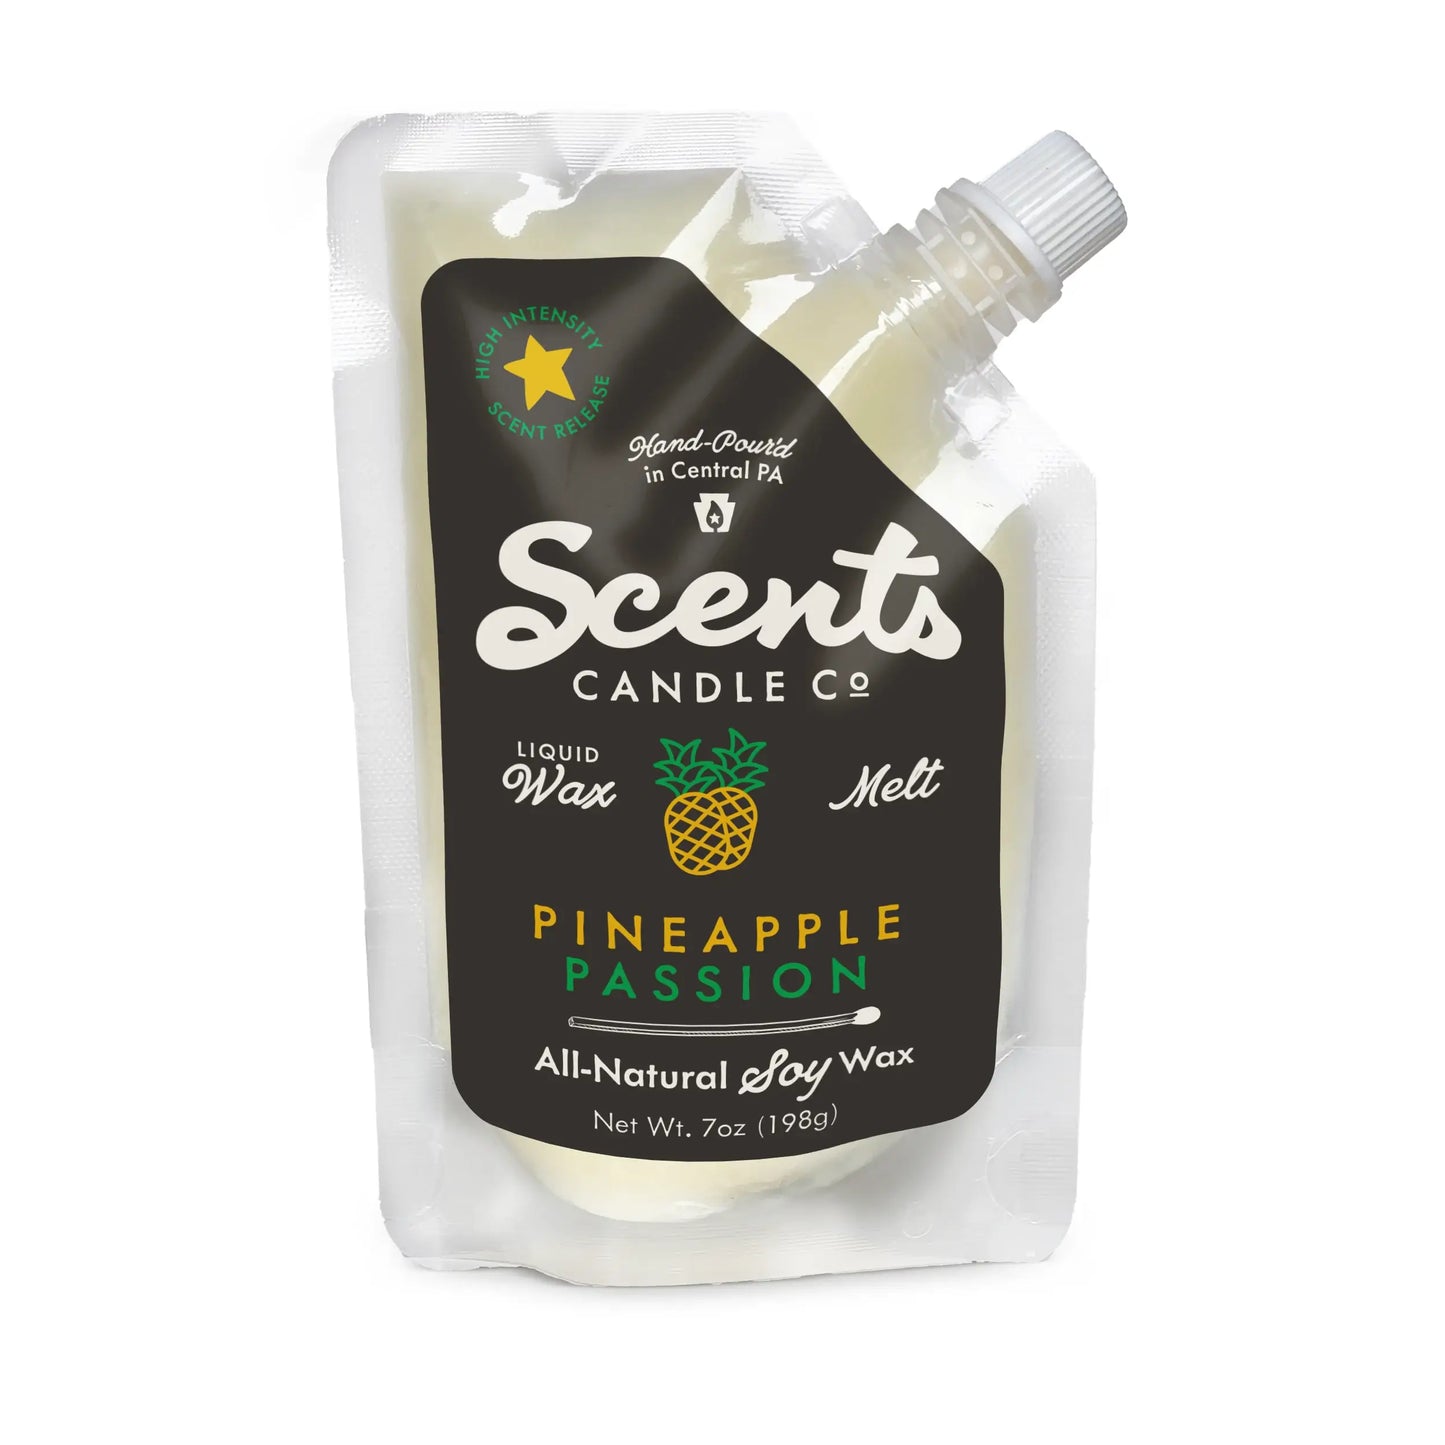 Scents Candle Co. Pineapple Passion Liquid Wax Melt